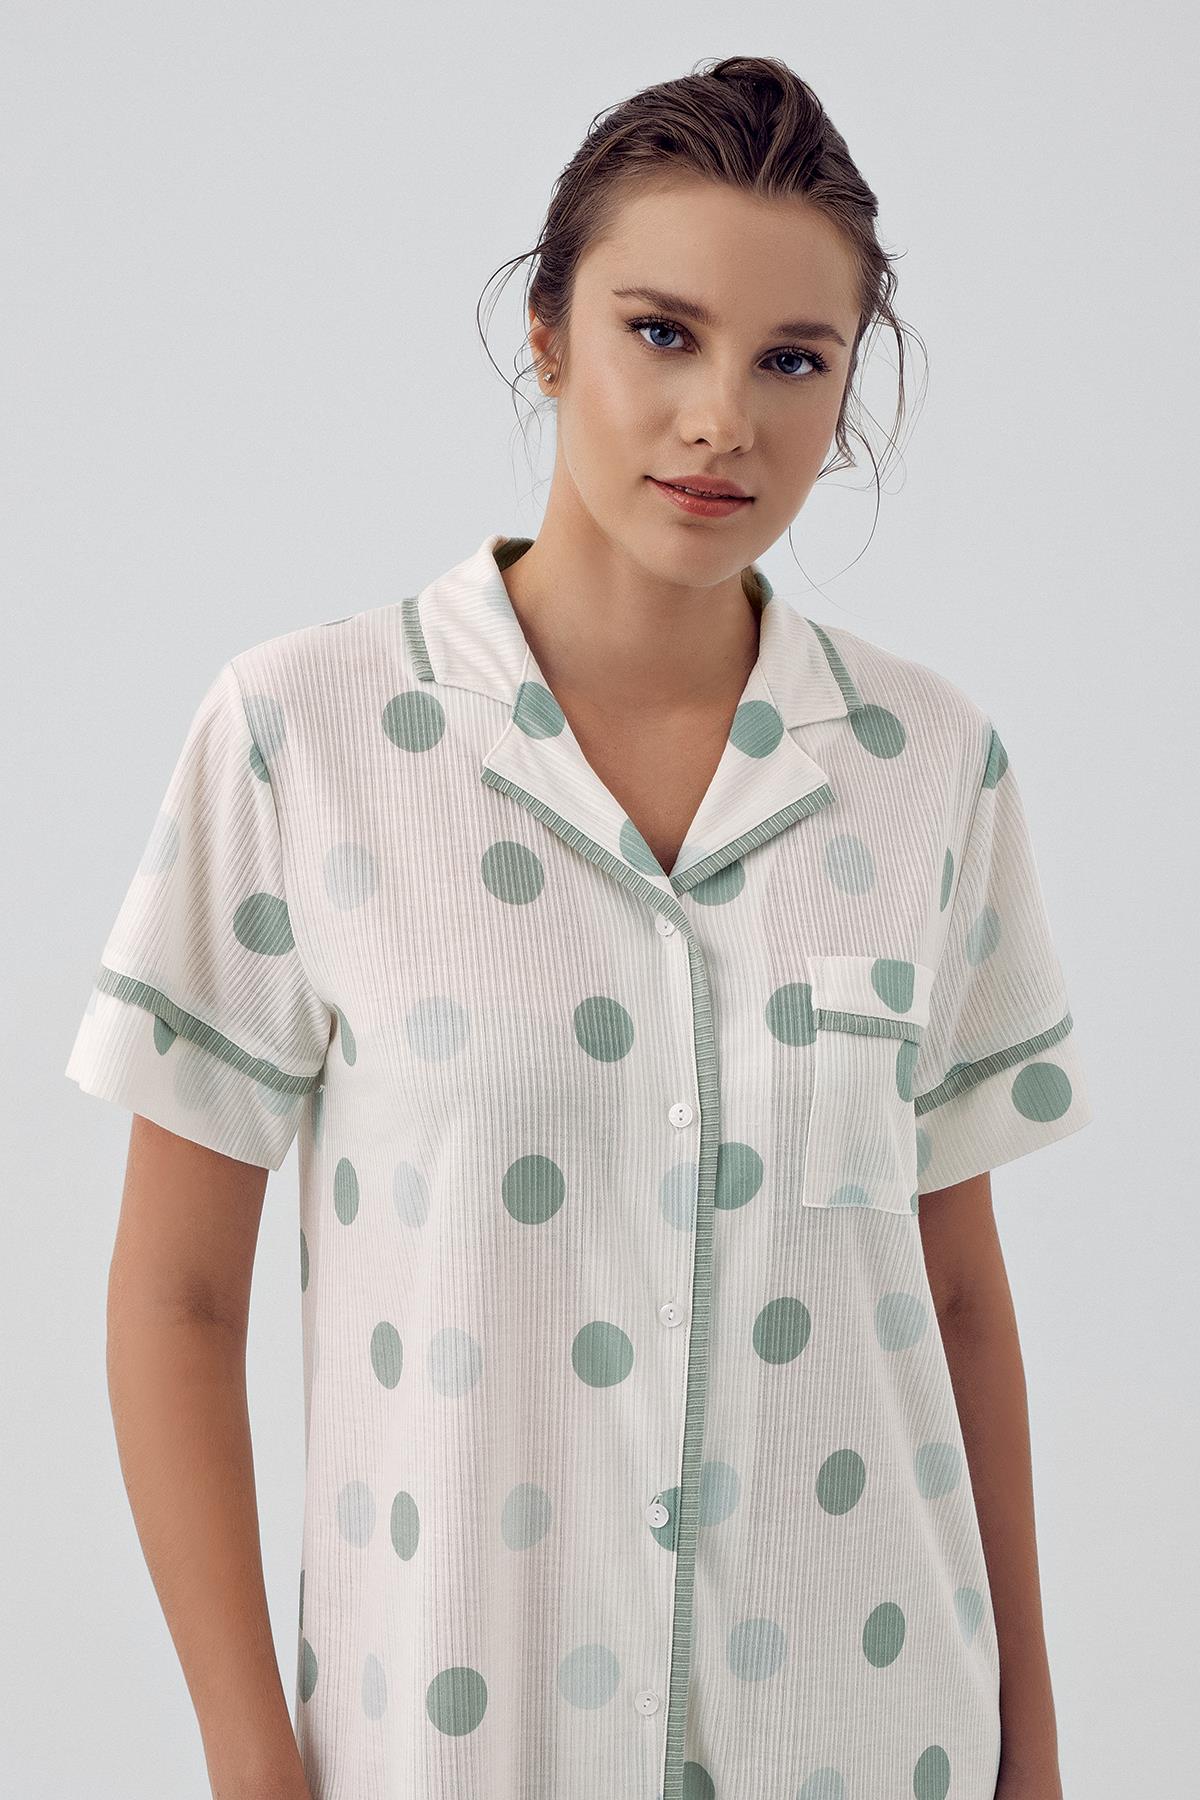 Buttoned Polka Dot Short Sleeved Flexible Viscose Nightgown 16100